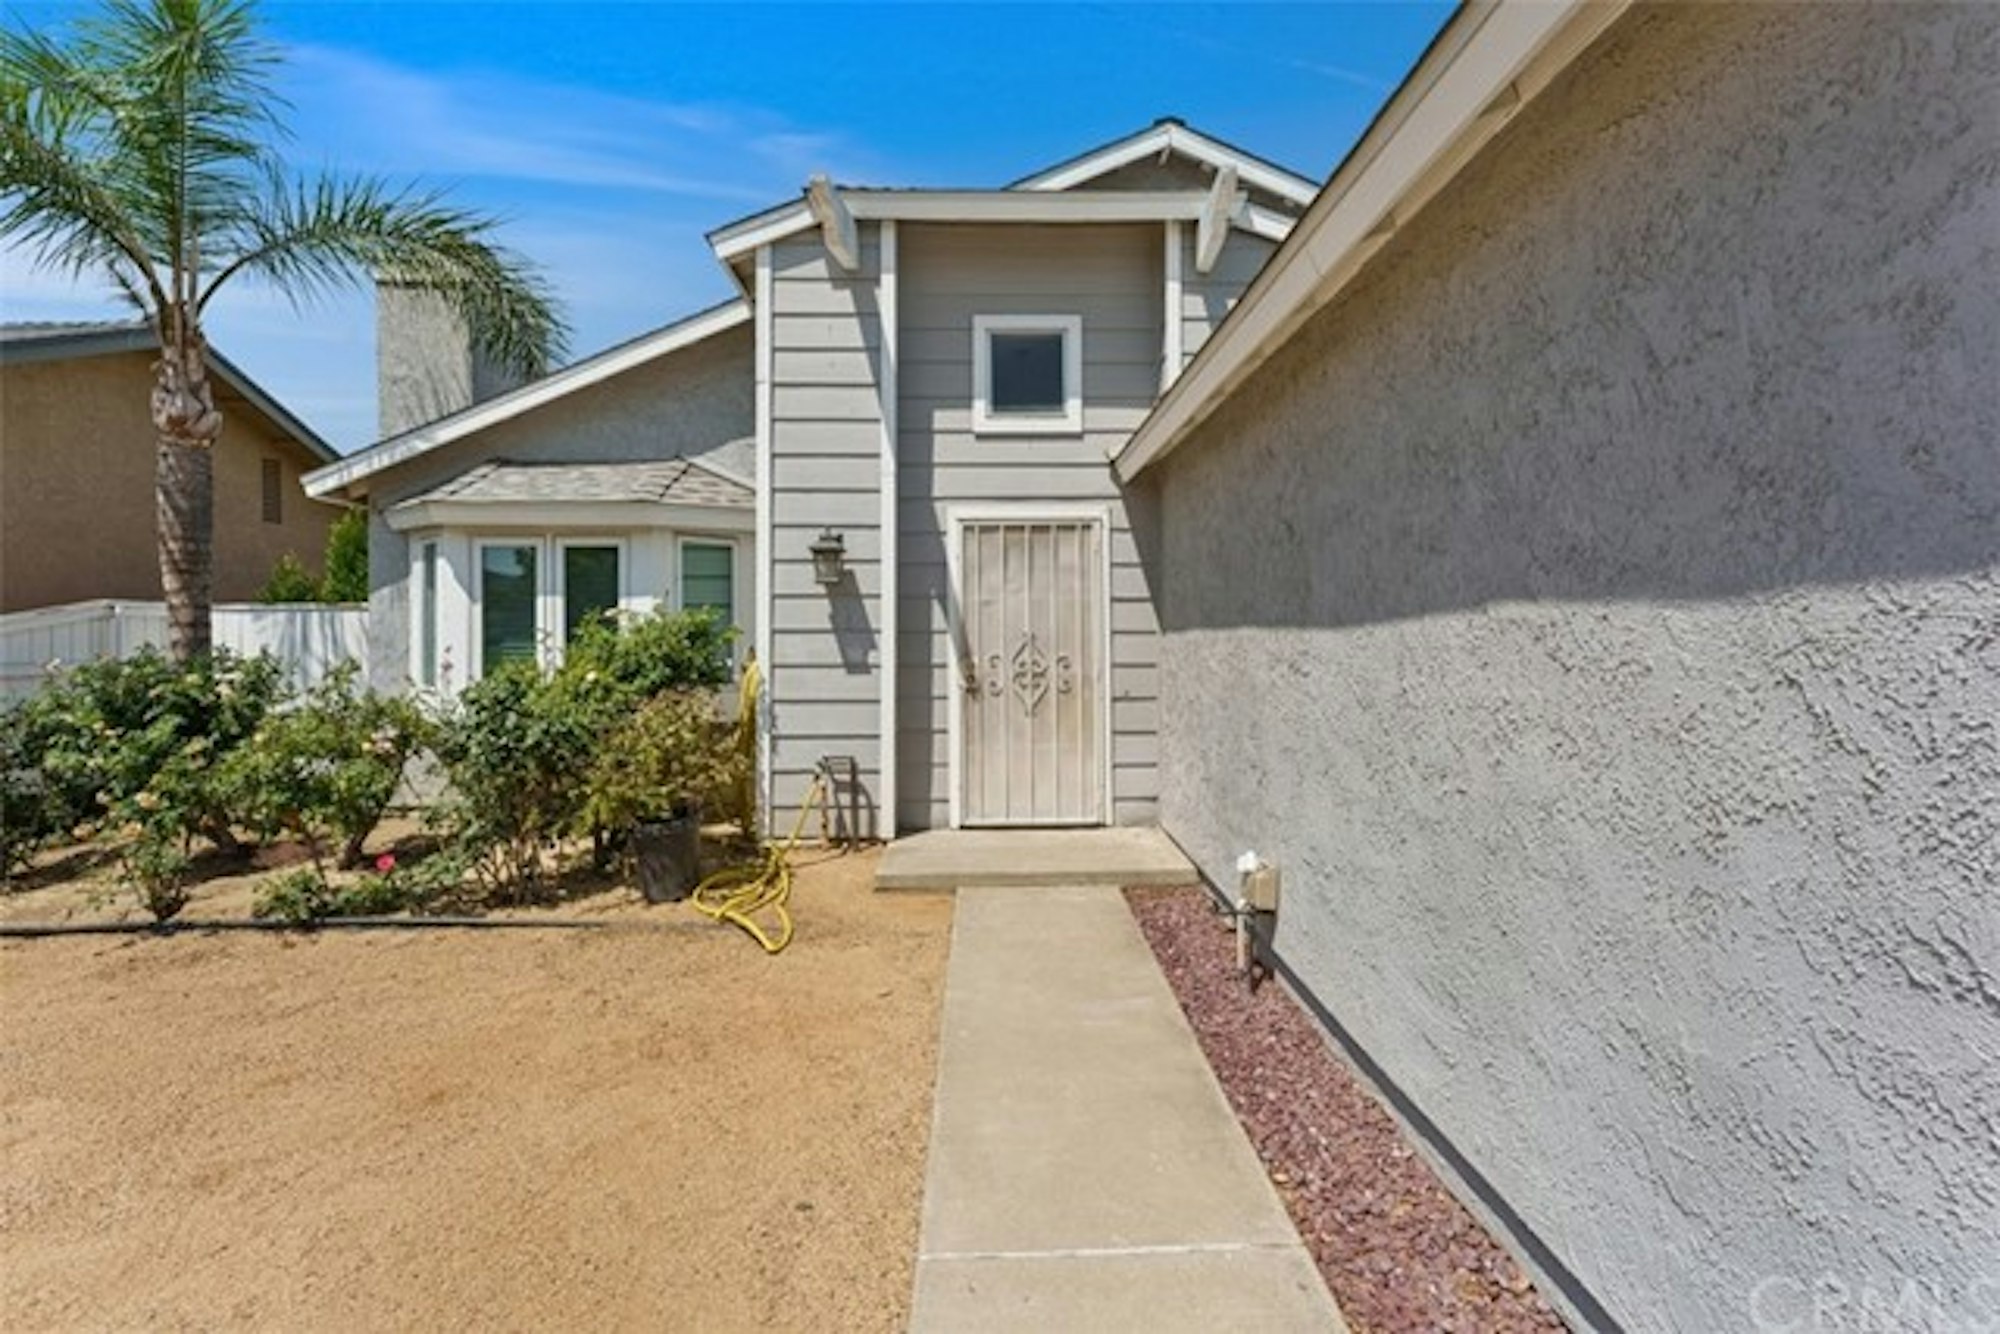 Photo 1 of 26 - 3227 Norelle Dr, Jurupa Valley, CA 91752